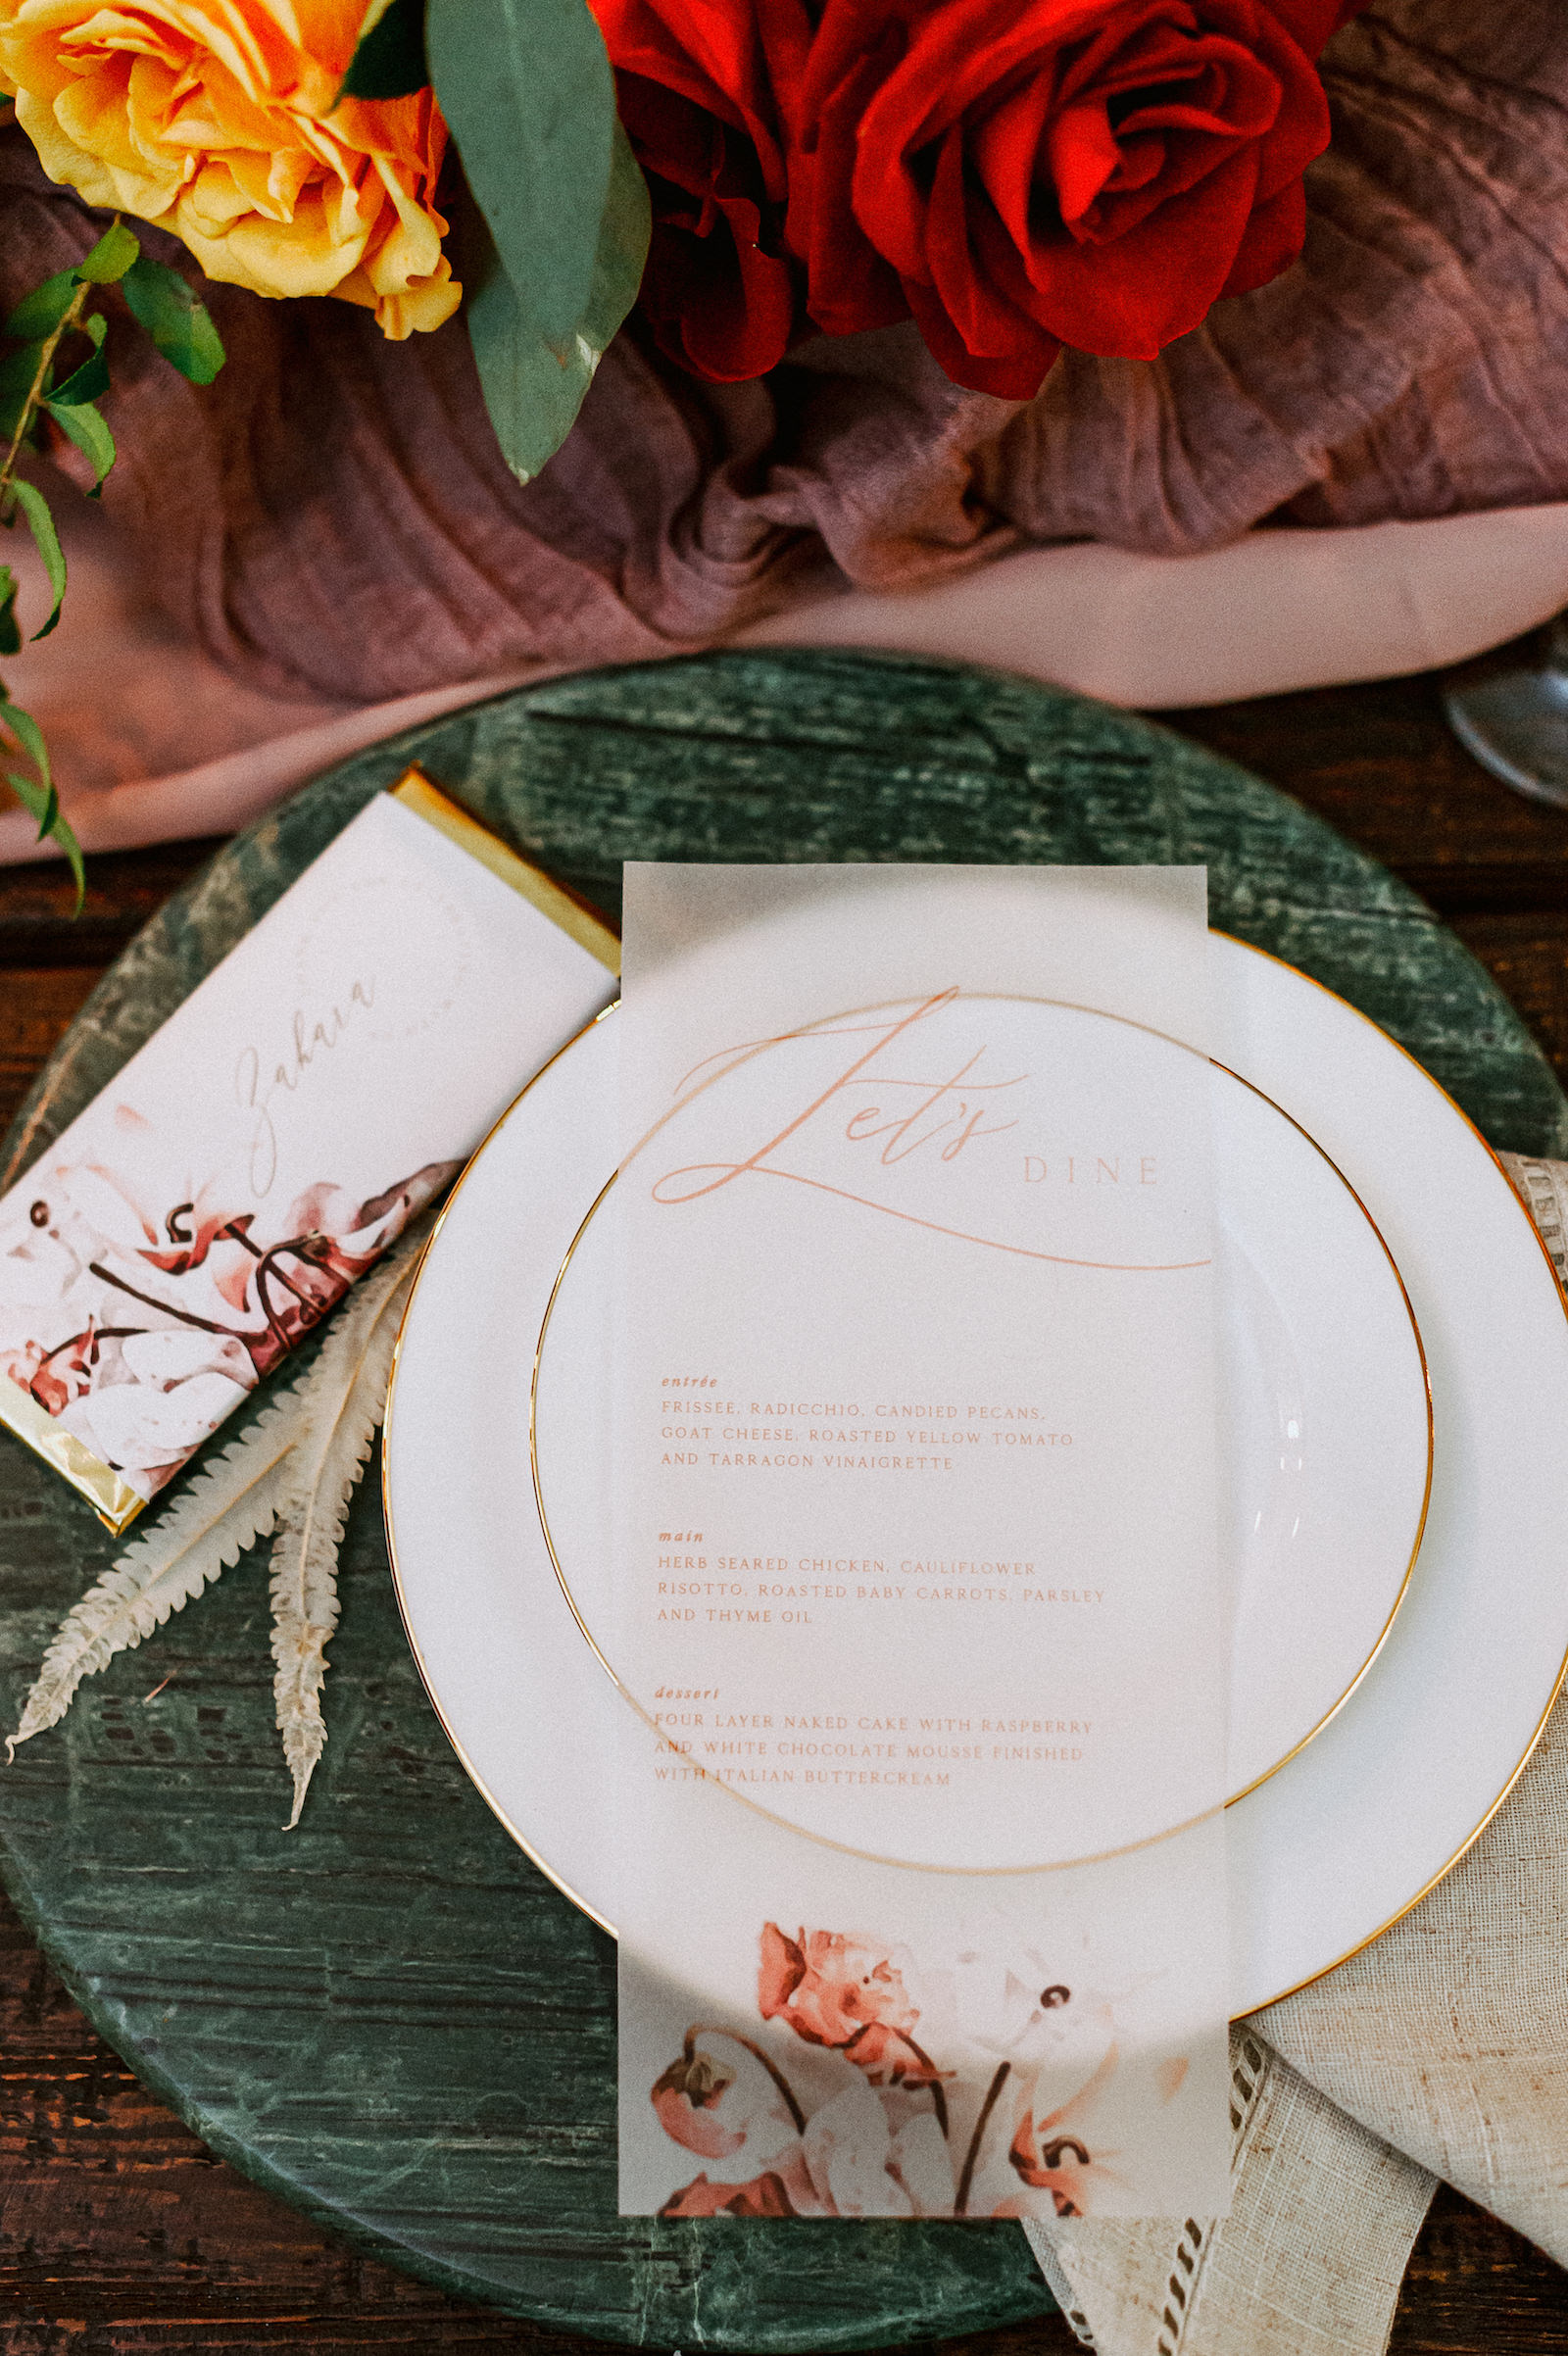 Vintage European Wedding Decor, White and Gold Rimmed China, Jade Marble Charger, Floral and Vellum Menu Stationery | Tampa Bay Wedding Photographer Dewitt for Love